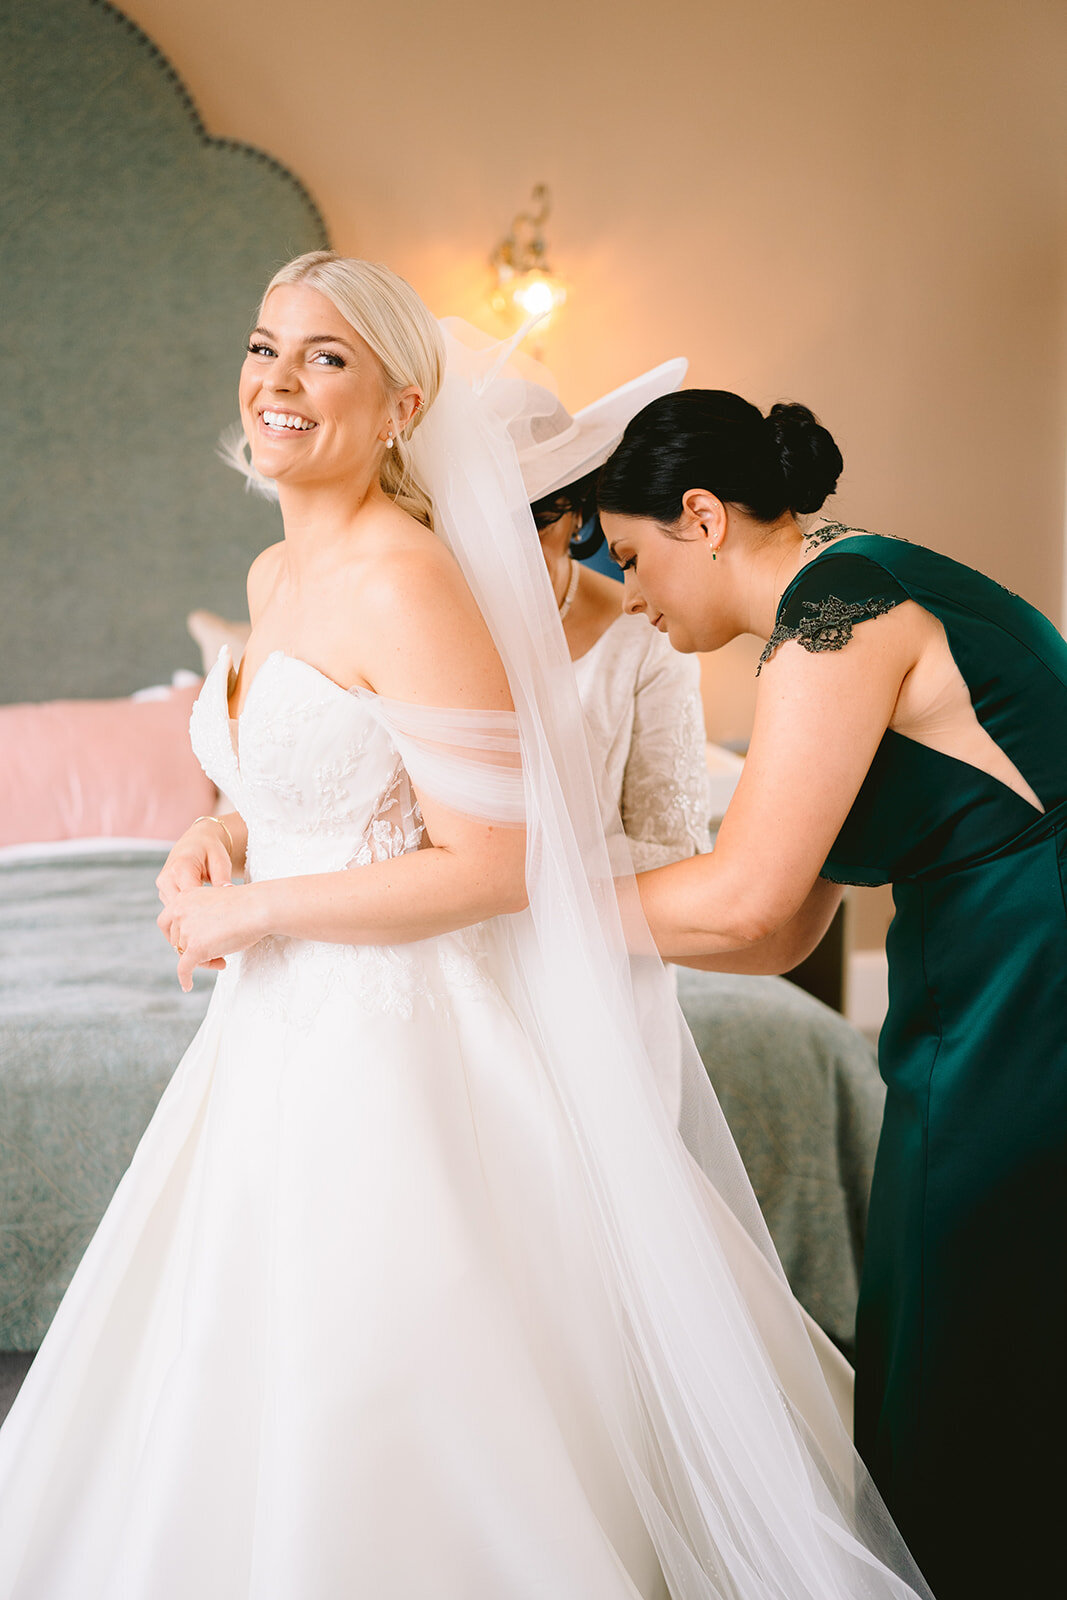 bridesmaid putting bride into the wedding dress in the bridal suite at hawkstone hall